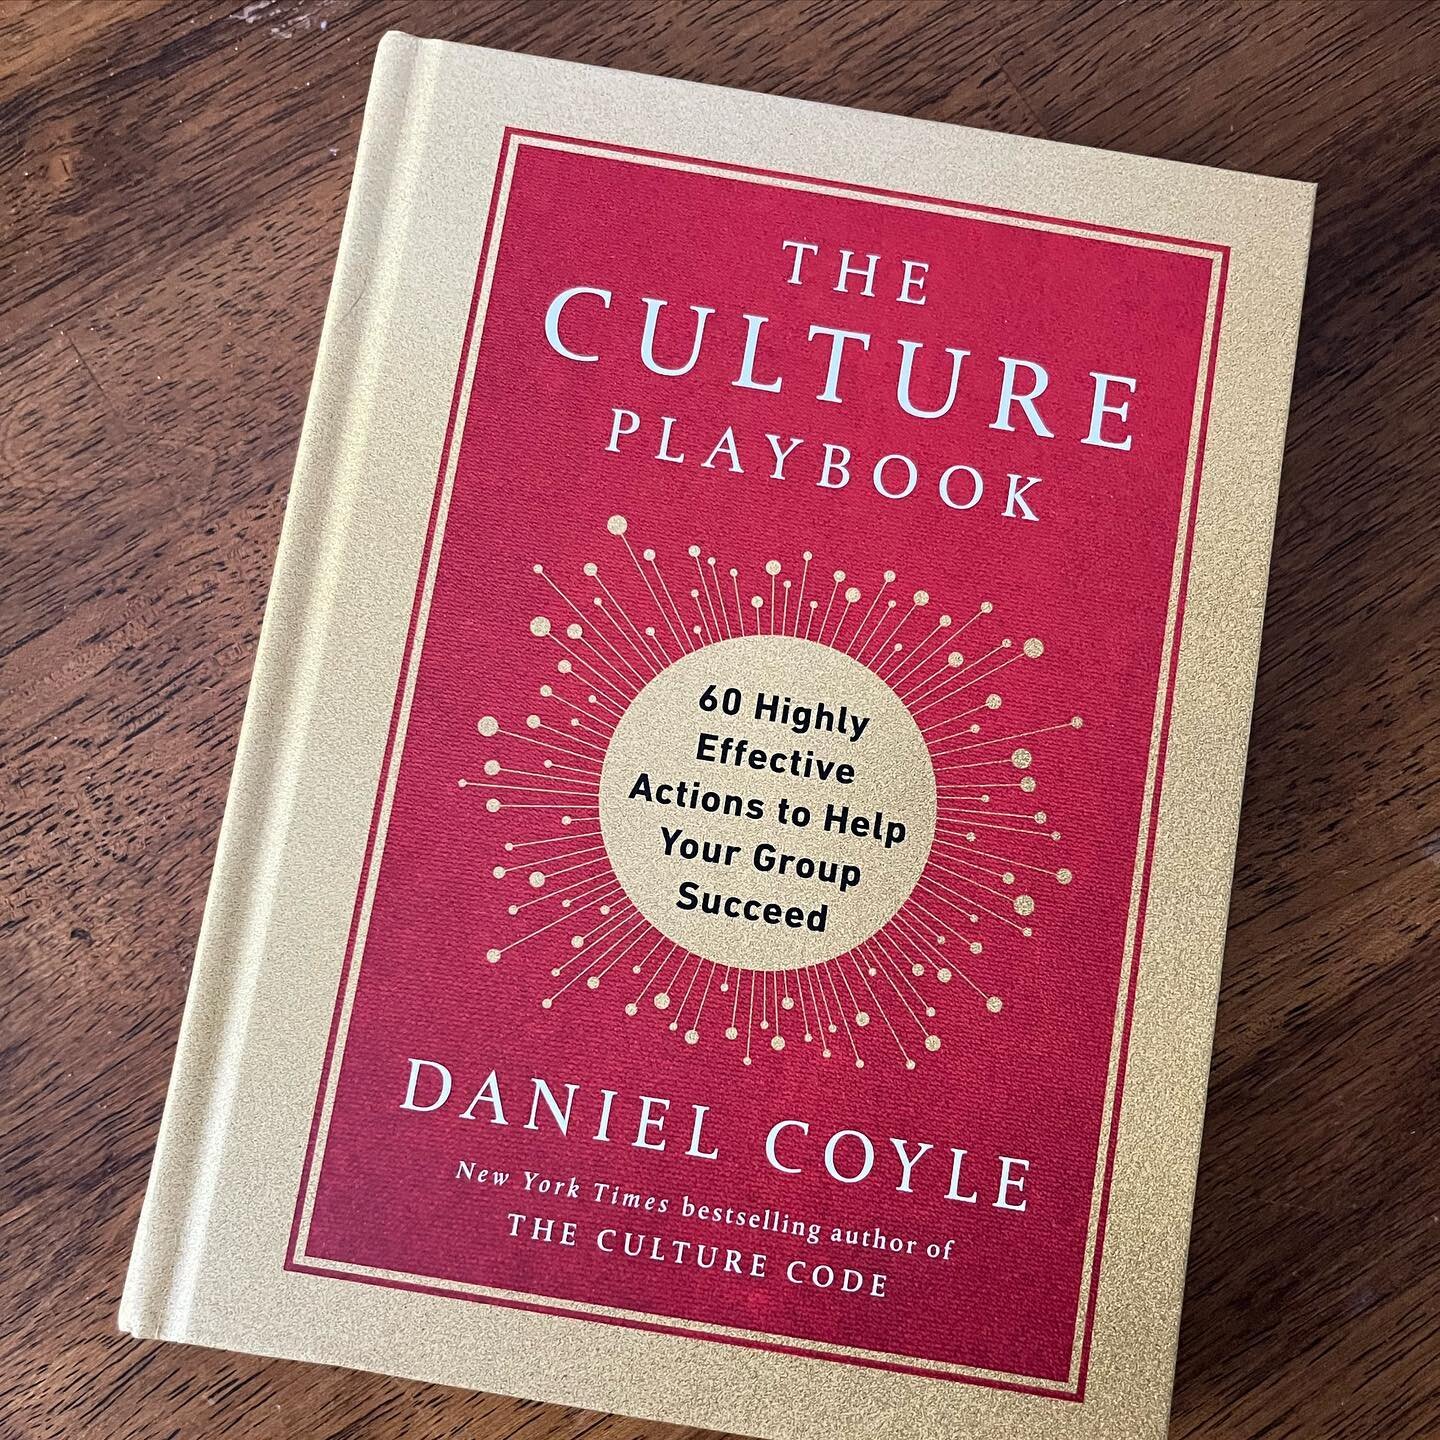 Honored to have illustrated The Culture Playbook by bestselling author (and friend) Daniel Coyle. It&rsquo;s a great, non-nonsense, practical playbook for work culture and dealing with the challenges of hybrid work. Here are a few sample illustration